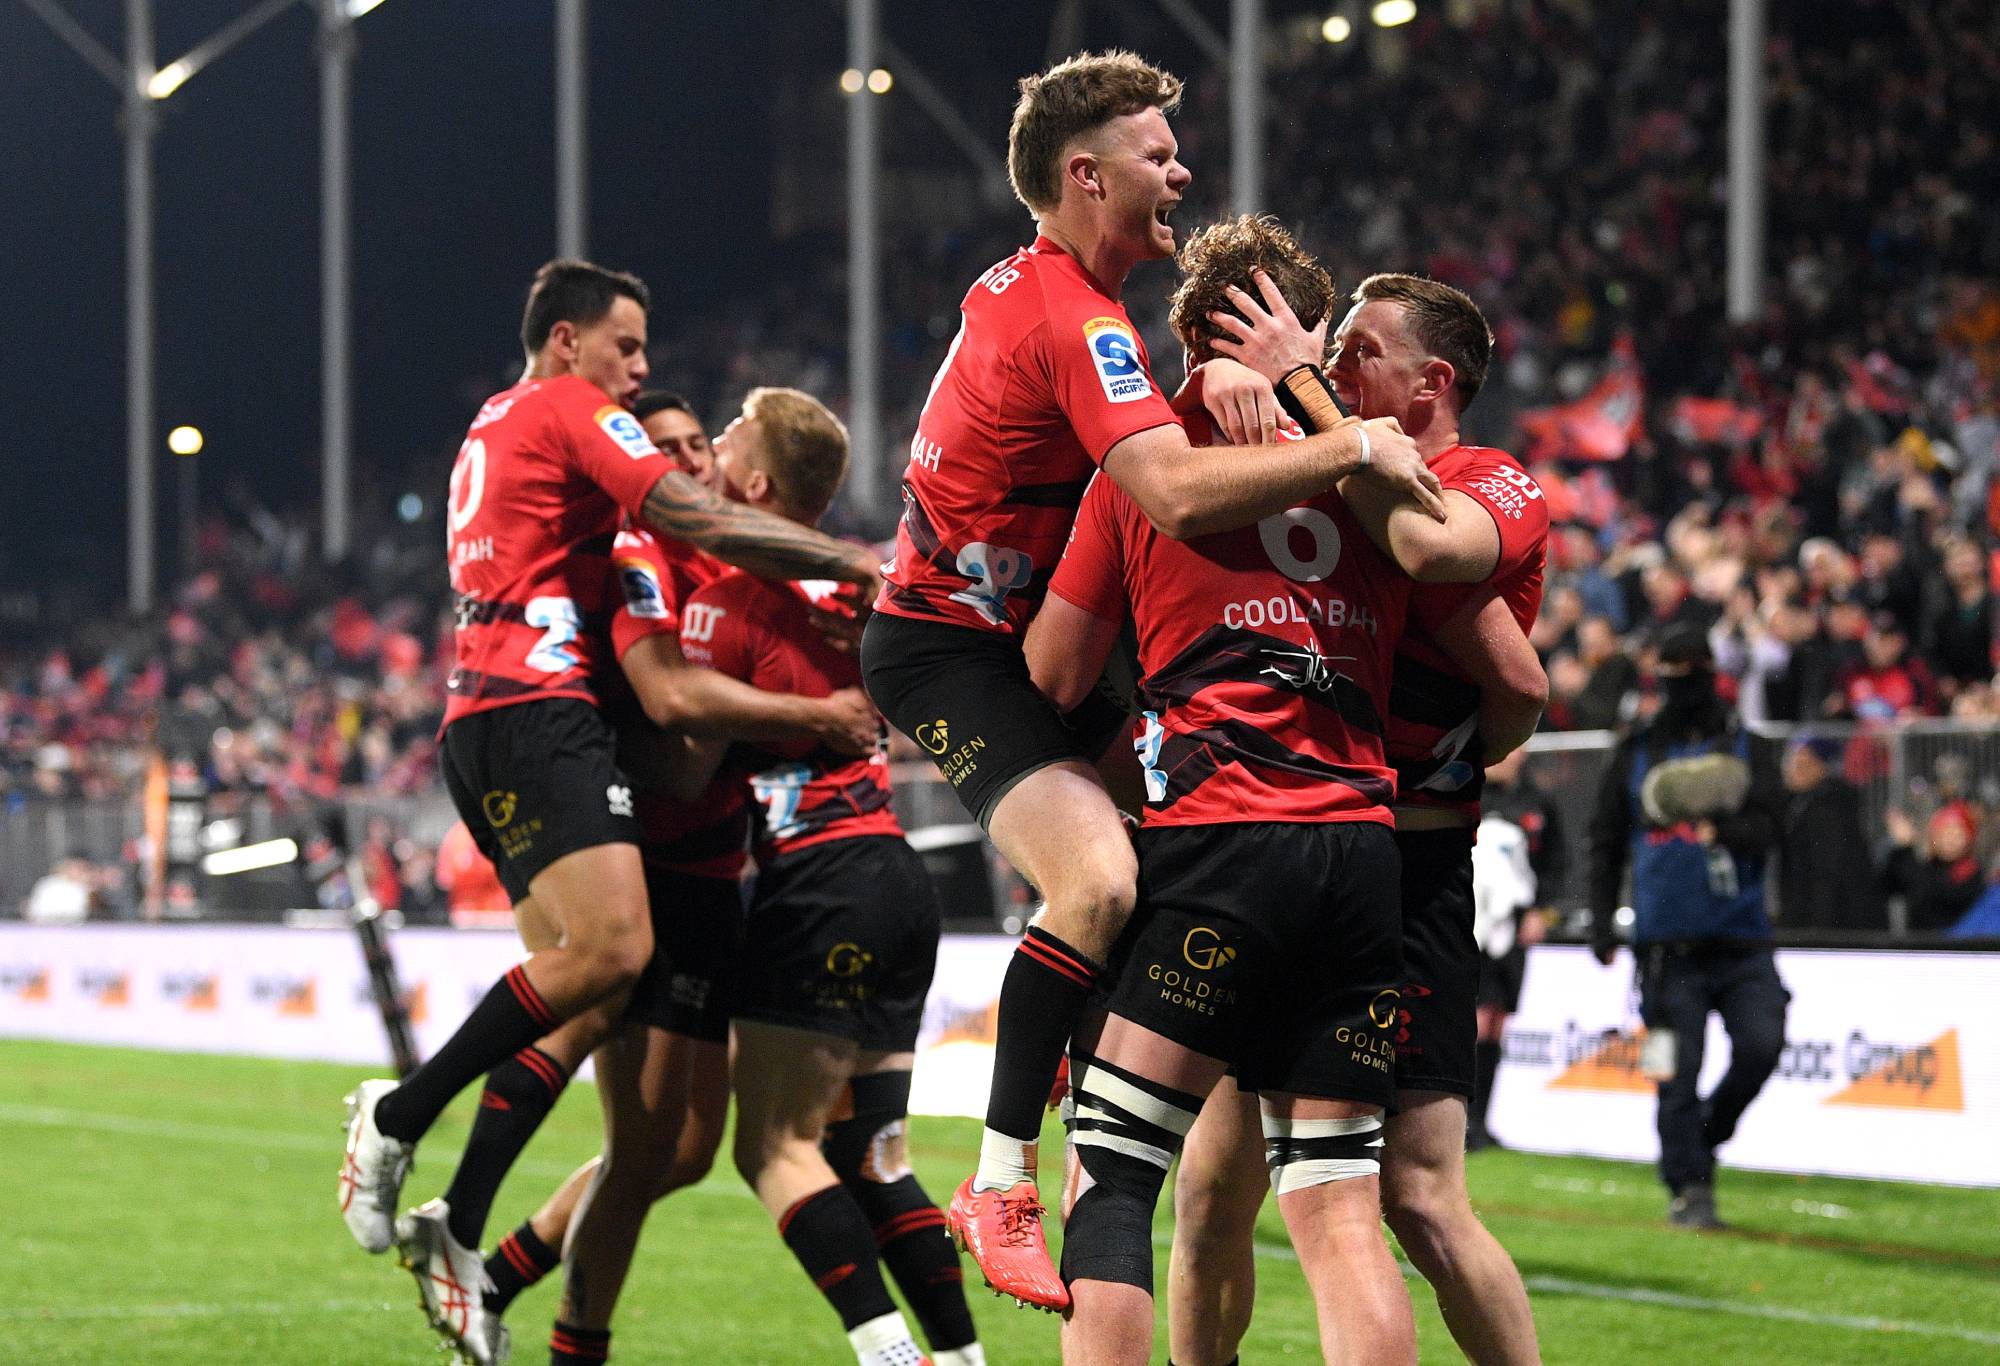 ‘We got our pants pulled down’: Rebels smashed in reality check as Crusaders keep finals hopes alive